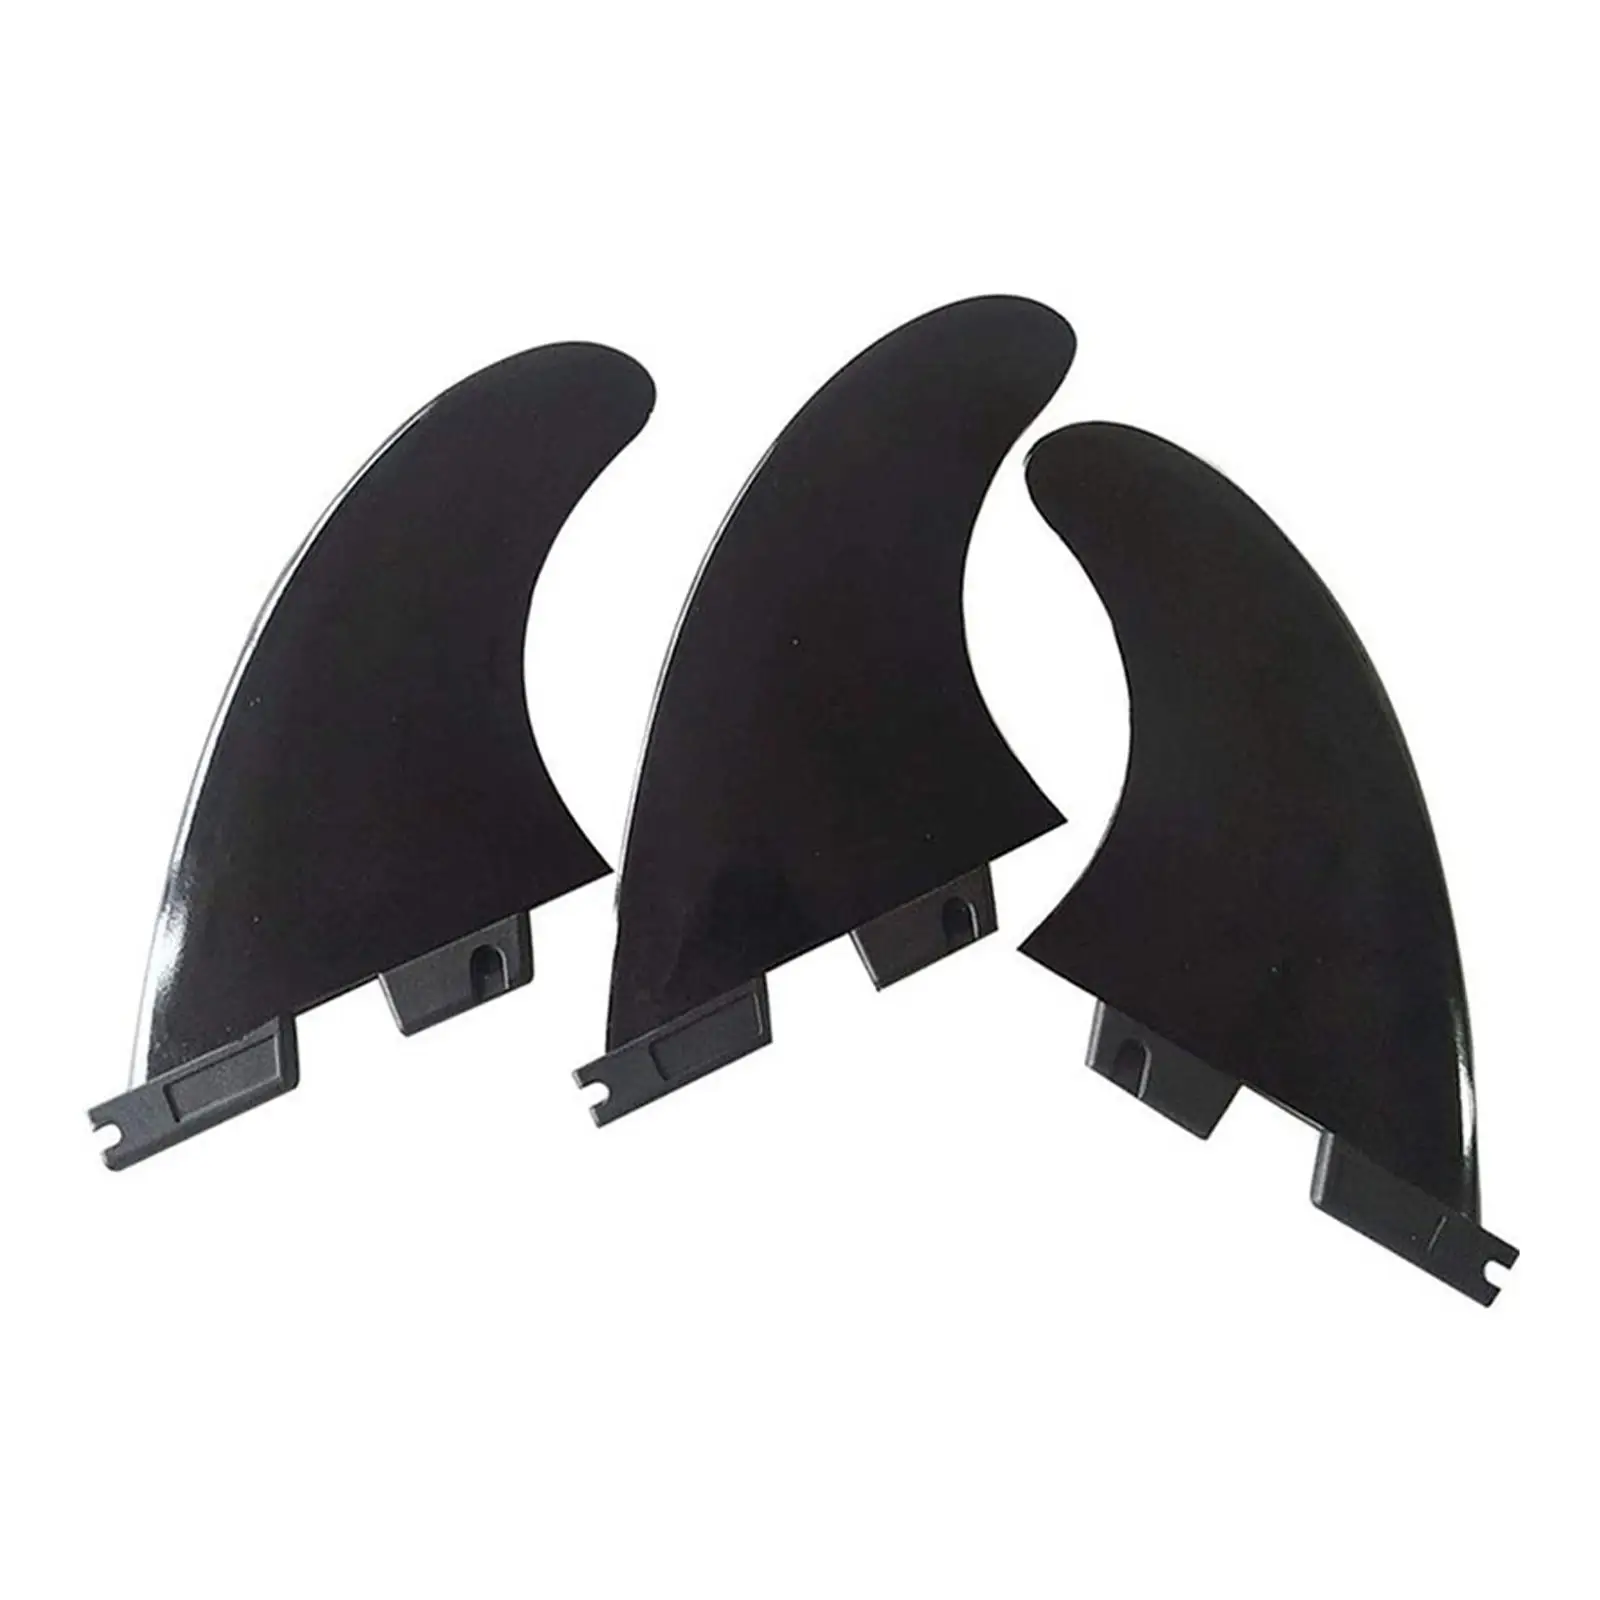 3Pcs Surfboard Fins Paddle Board Fin Detachable Paddleboard Fin for Water Sports Longboard Boat Stand up Paddleboard Repair